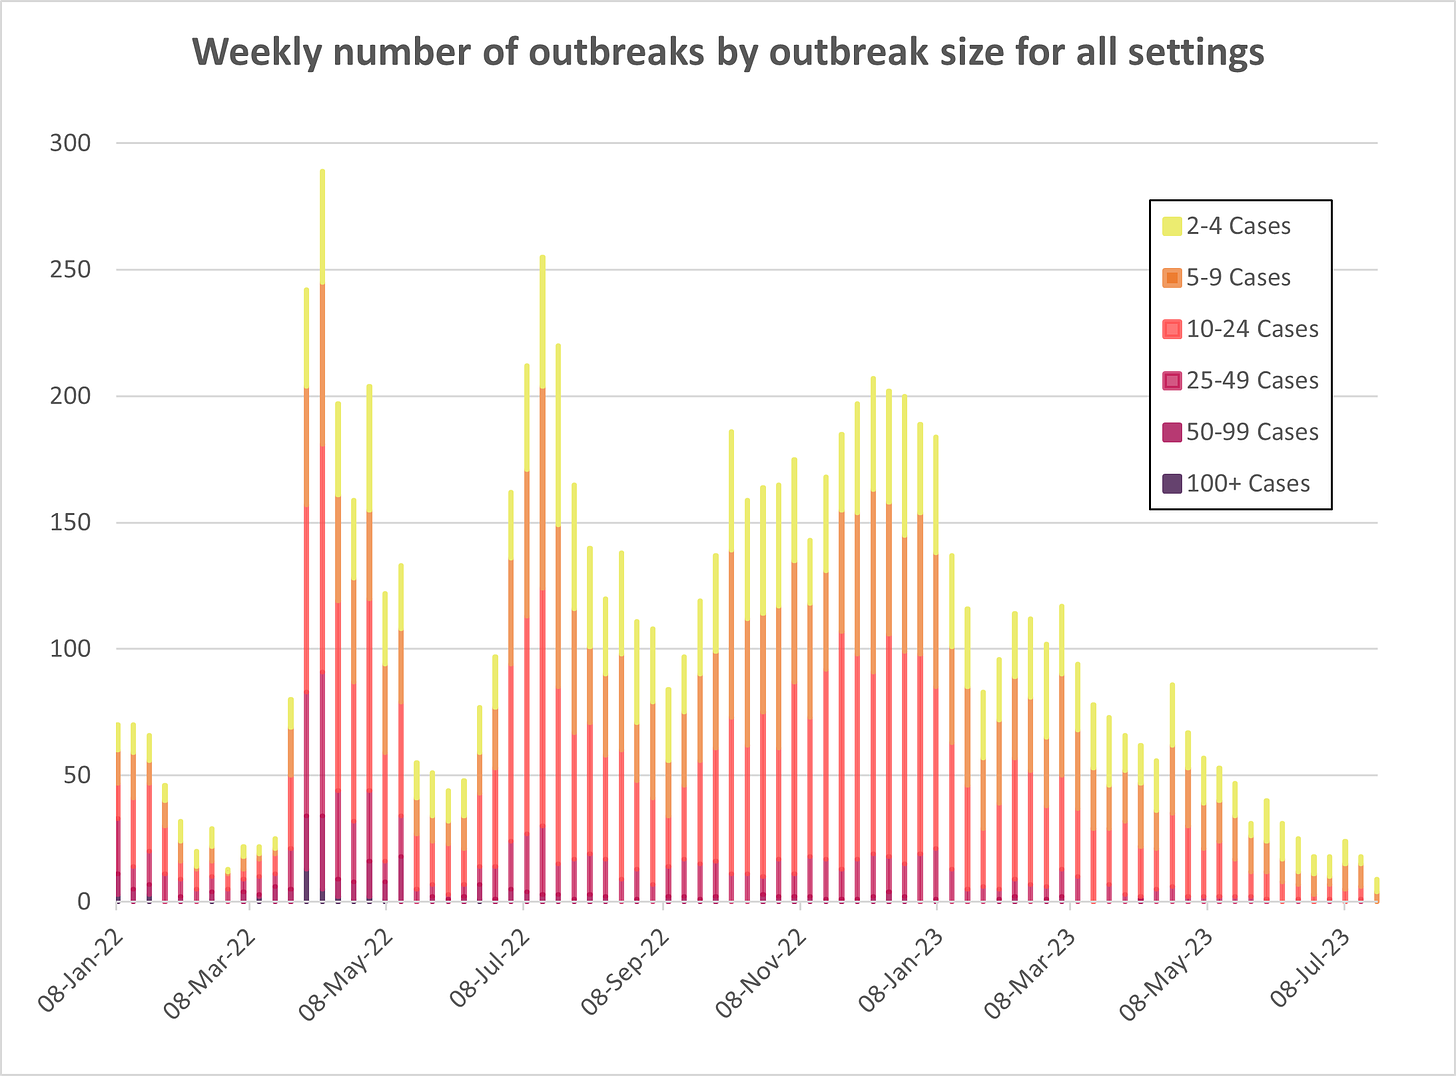 Stacked bar chart of weekly outbreaks by outbreak size (2-4 cases, 5-9 cases, 10-24 cases, 25-49 cases, 50-99 cases, 100+ cases) in Canada from January 8th, 2022 to July 9th, 2023. Rates begin at around 70, return to low levels, spike to around 300 in April 2022, return to lower levels though higher than the previous lull, spike again to around 250 in Summer 2022 then decrease to around 100 (a much higher lull), remain around 150-200 from October 2022 to January 2023, then from 50-100 until May 2023, then decrease to around 25. 